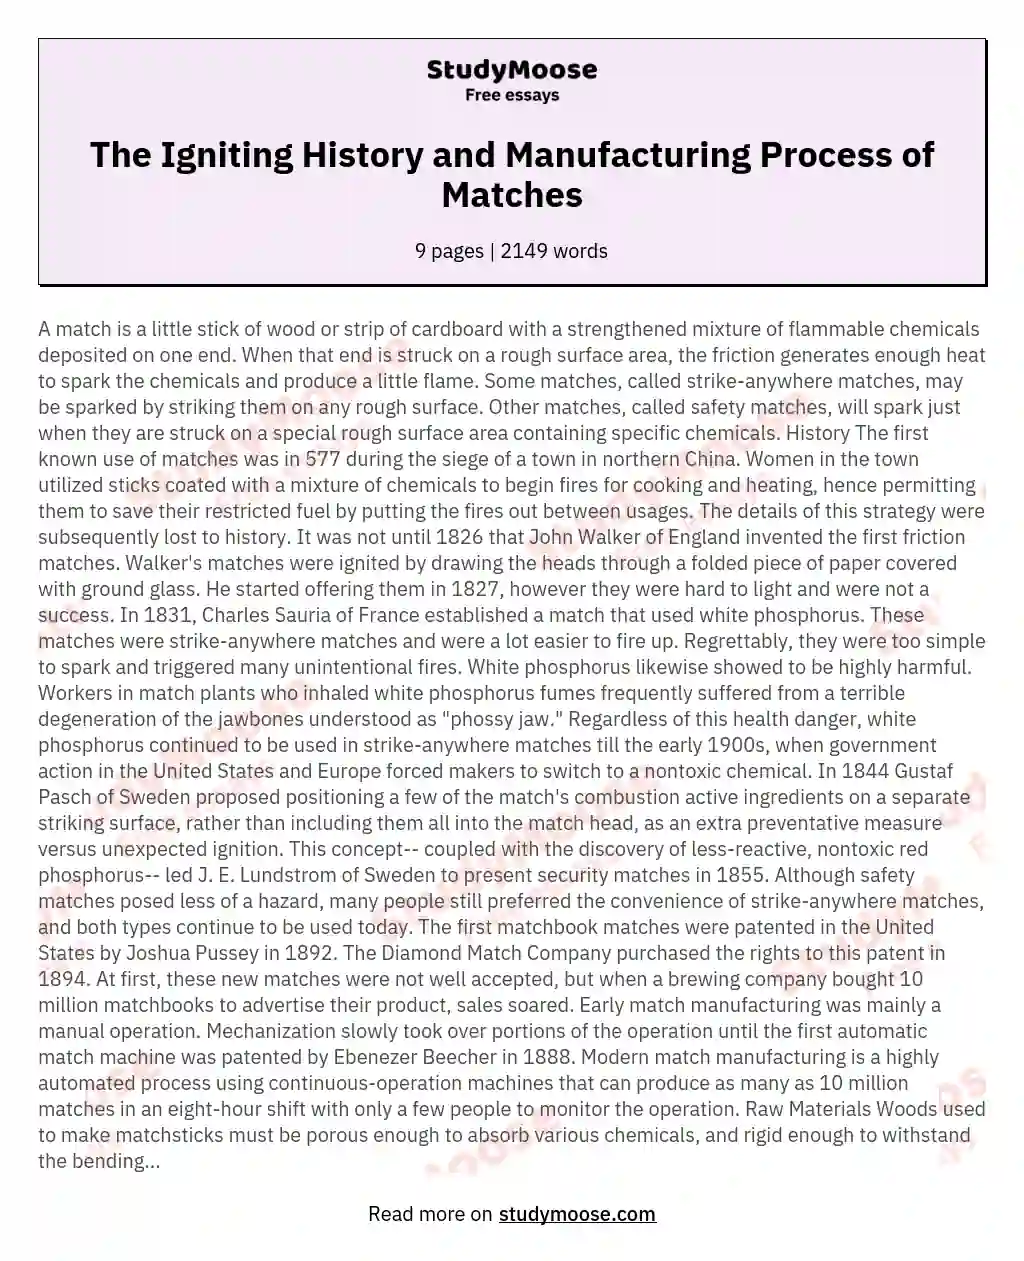 The Igniting History and Manufacturing Process of Matches essay